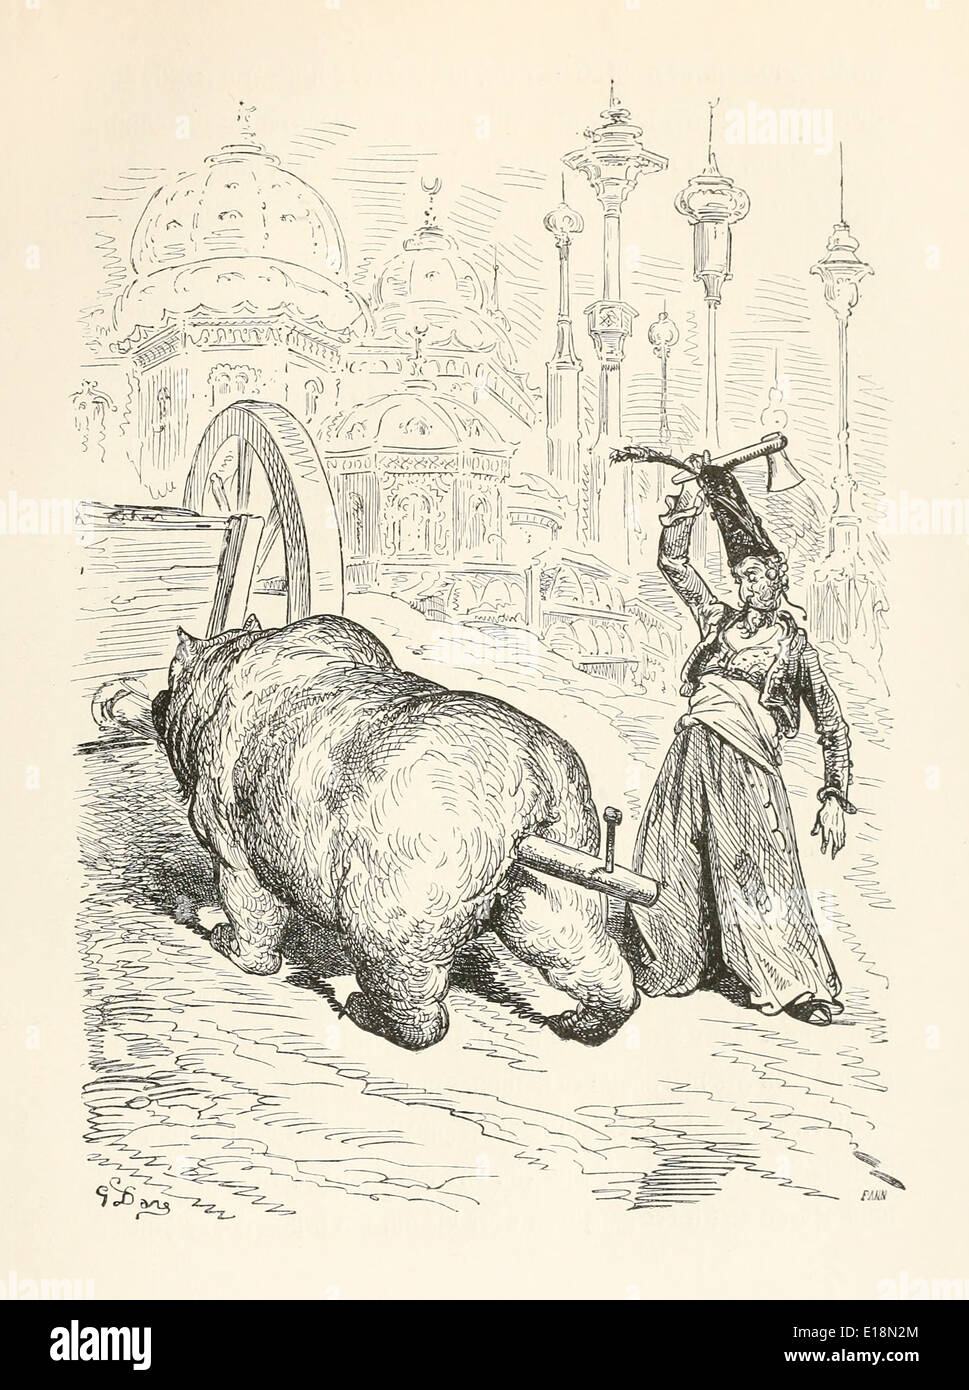 Chapter 5  The Baron drives a peg through a pole covered in honey trapping the greedy bear. Paul Gustave Doré (1832-1883) illustration from ‘The Adventures of Baron Munchausen’ by Rudoph Raspe published in 1862. Stock Photo